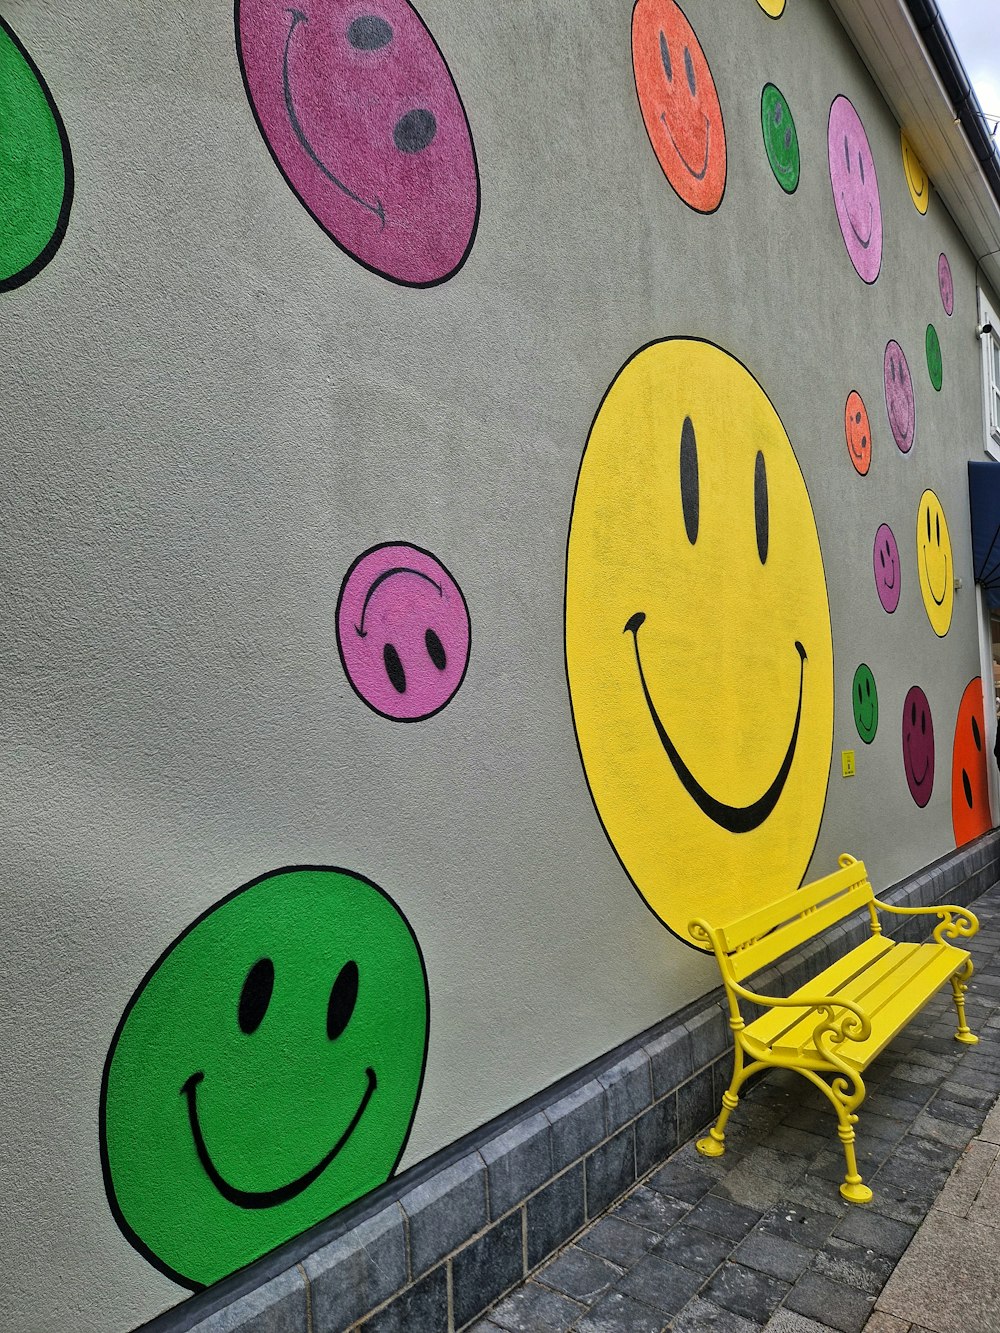 a wall with a drawing of a cartoon character on it